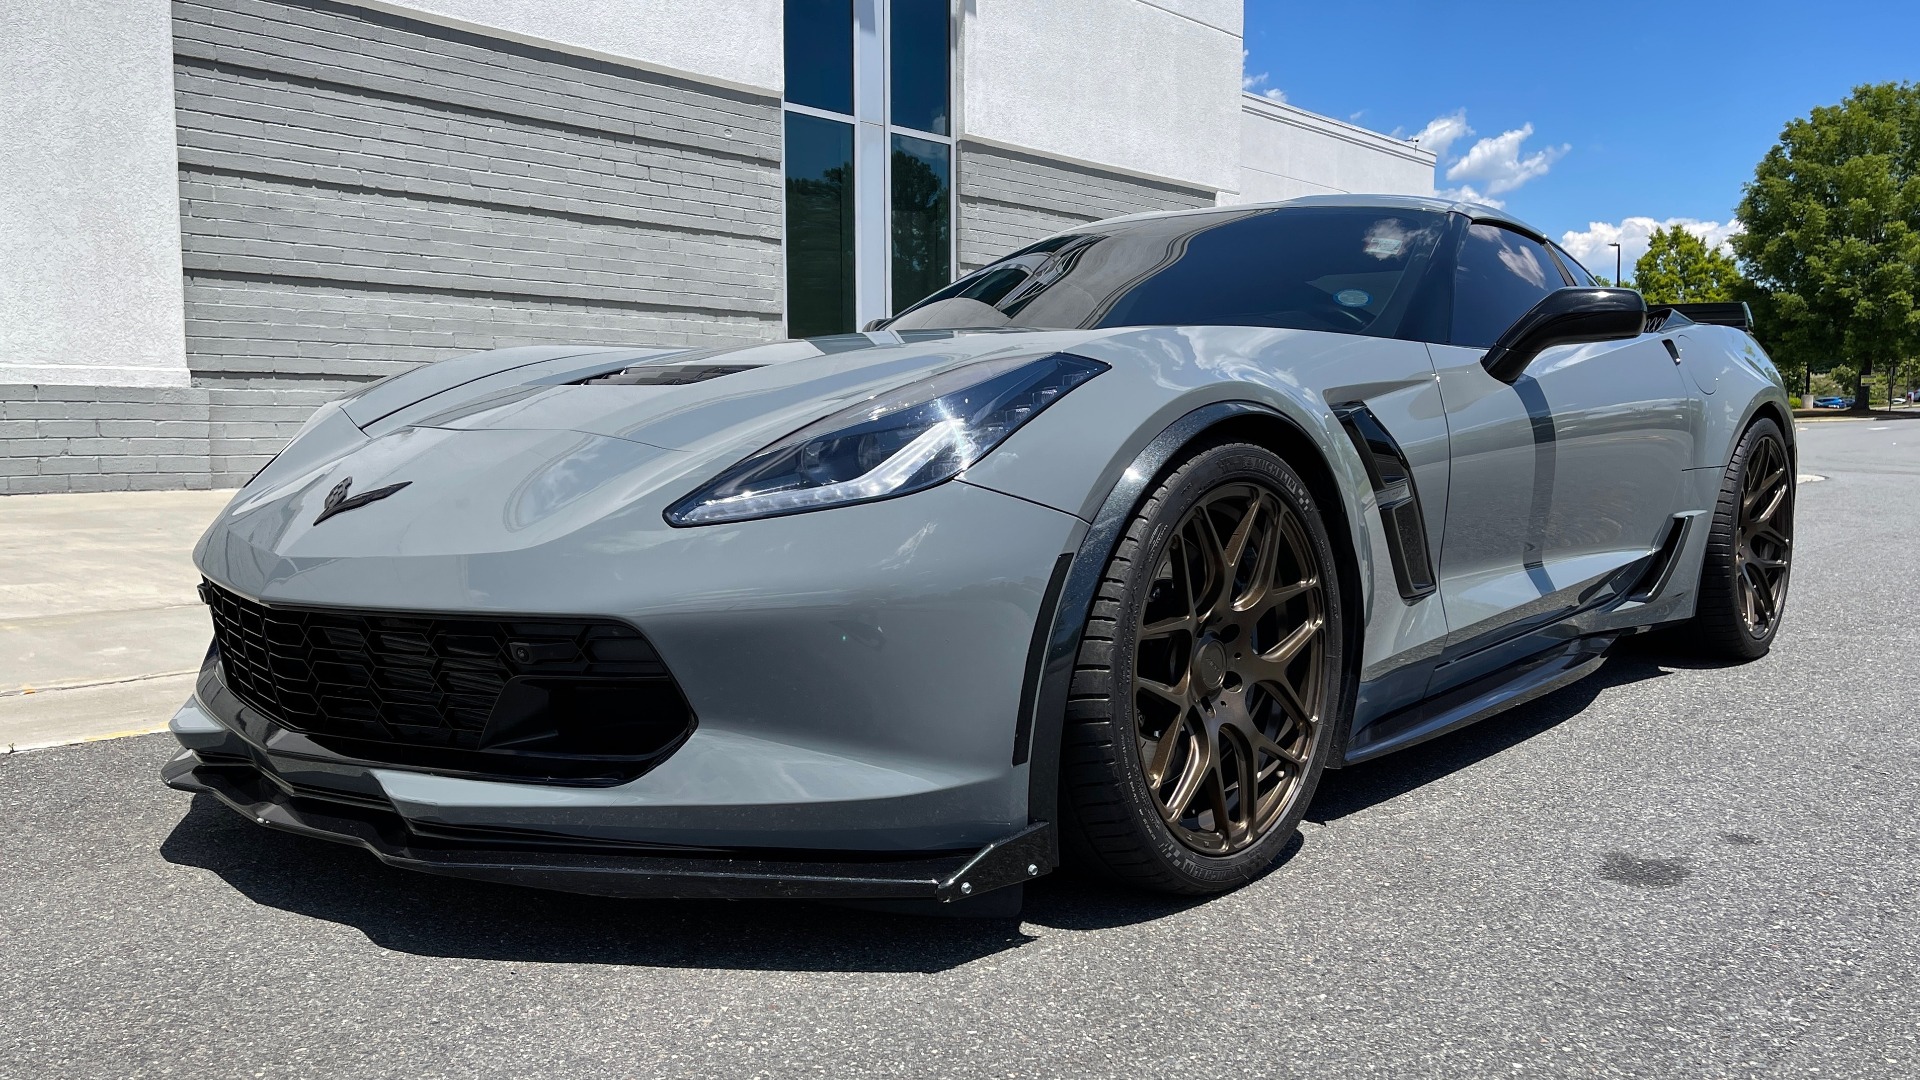 Used 2019 Chevrolet CORVETTE GRAND SPORT 3LT / SUPERCHARGED 6.2L V8 / NAV / REARVIEW for sale Sold at Formula Imports in Charlotte NC 28227 2